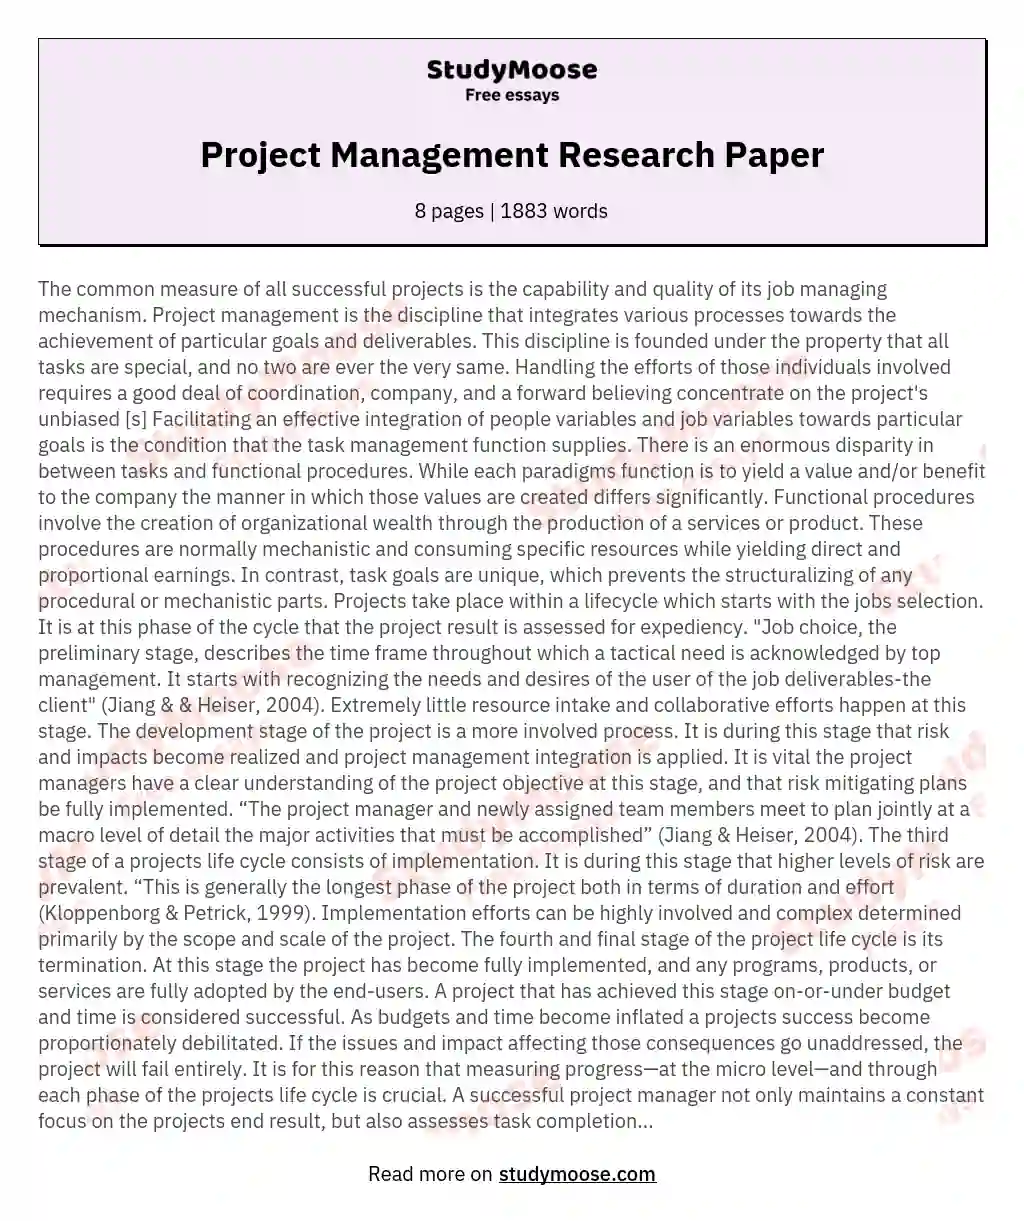 Project Management Research Paper